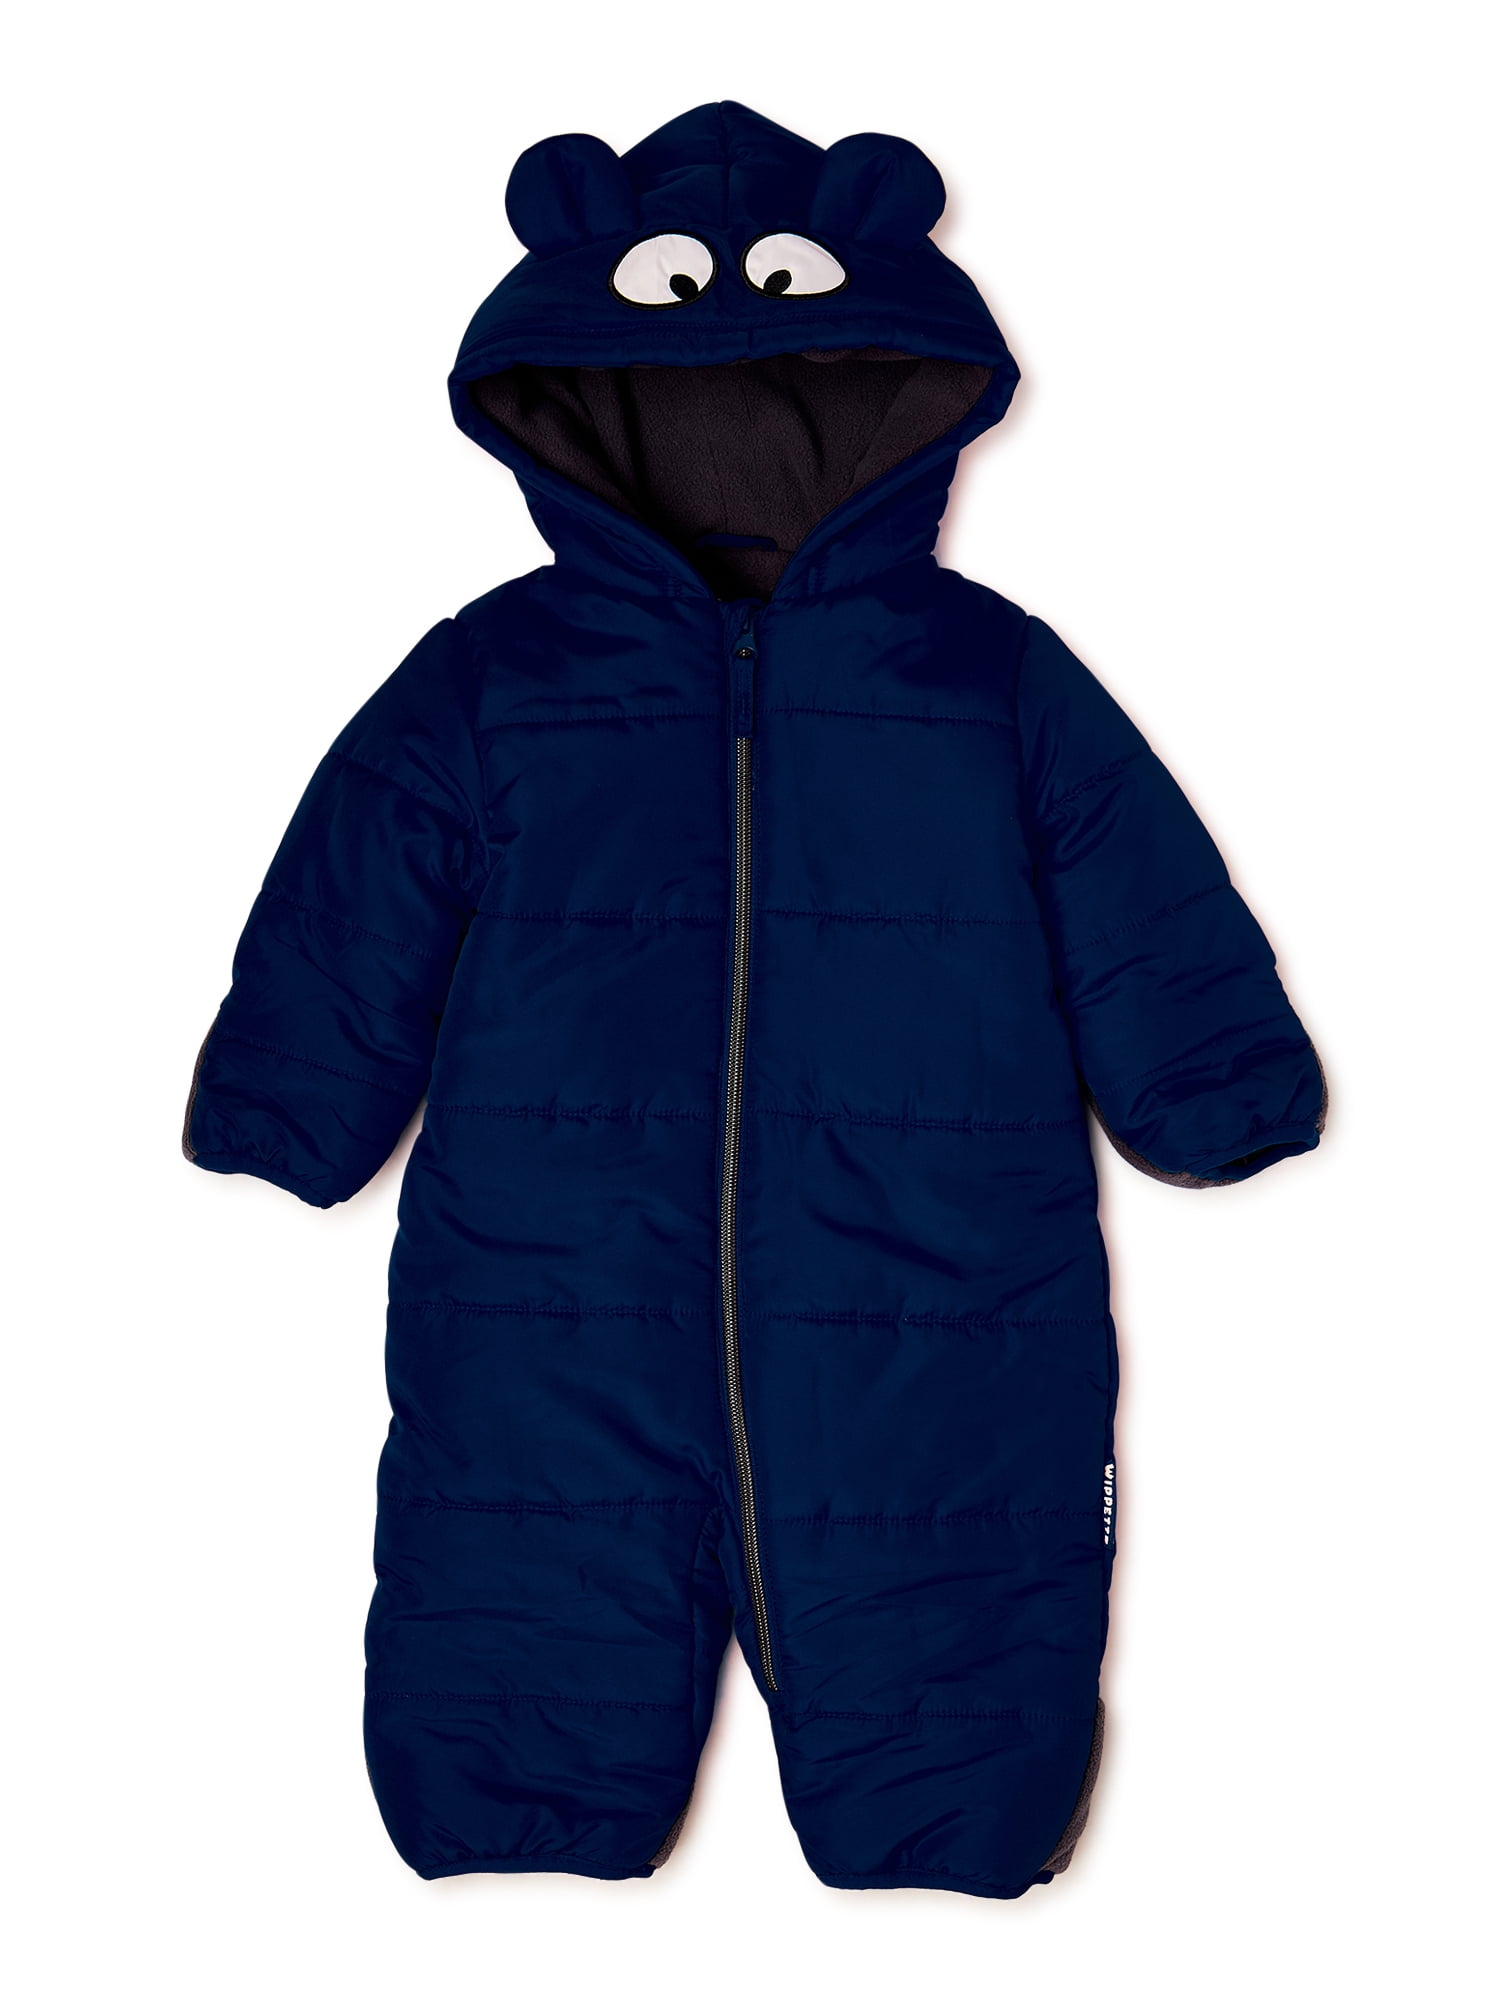 NEW Rothschild Baby Boys' Hooded Navy Quilted Pram Snowsuit 12  Months 